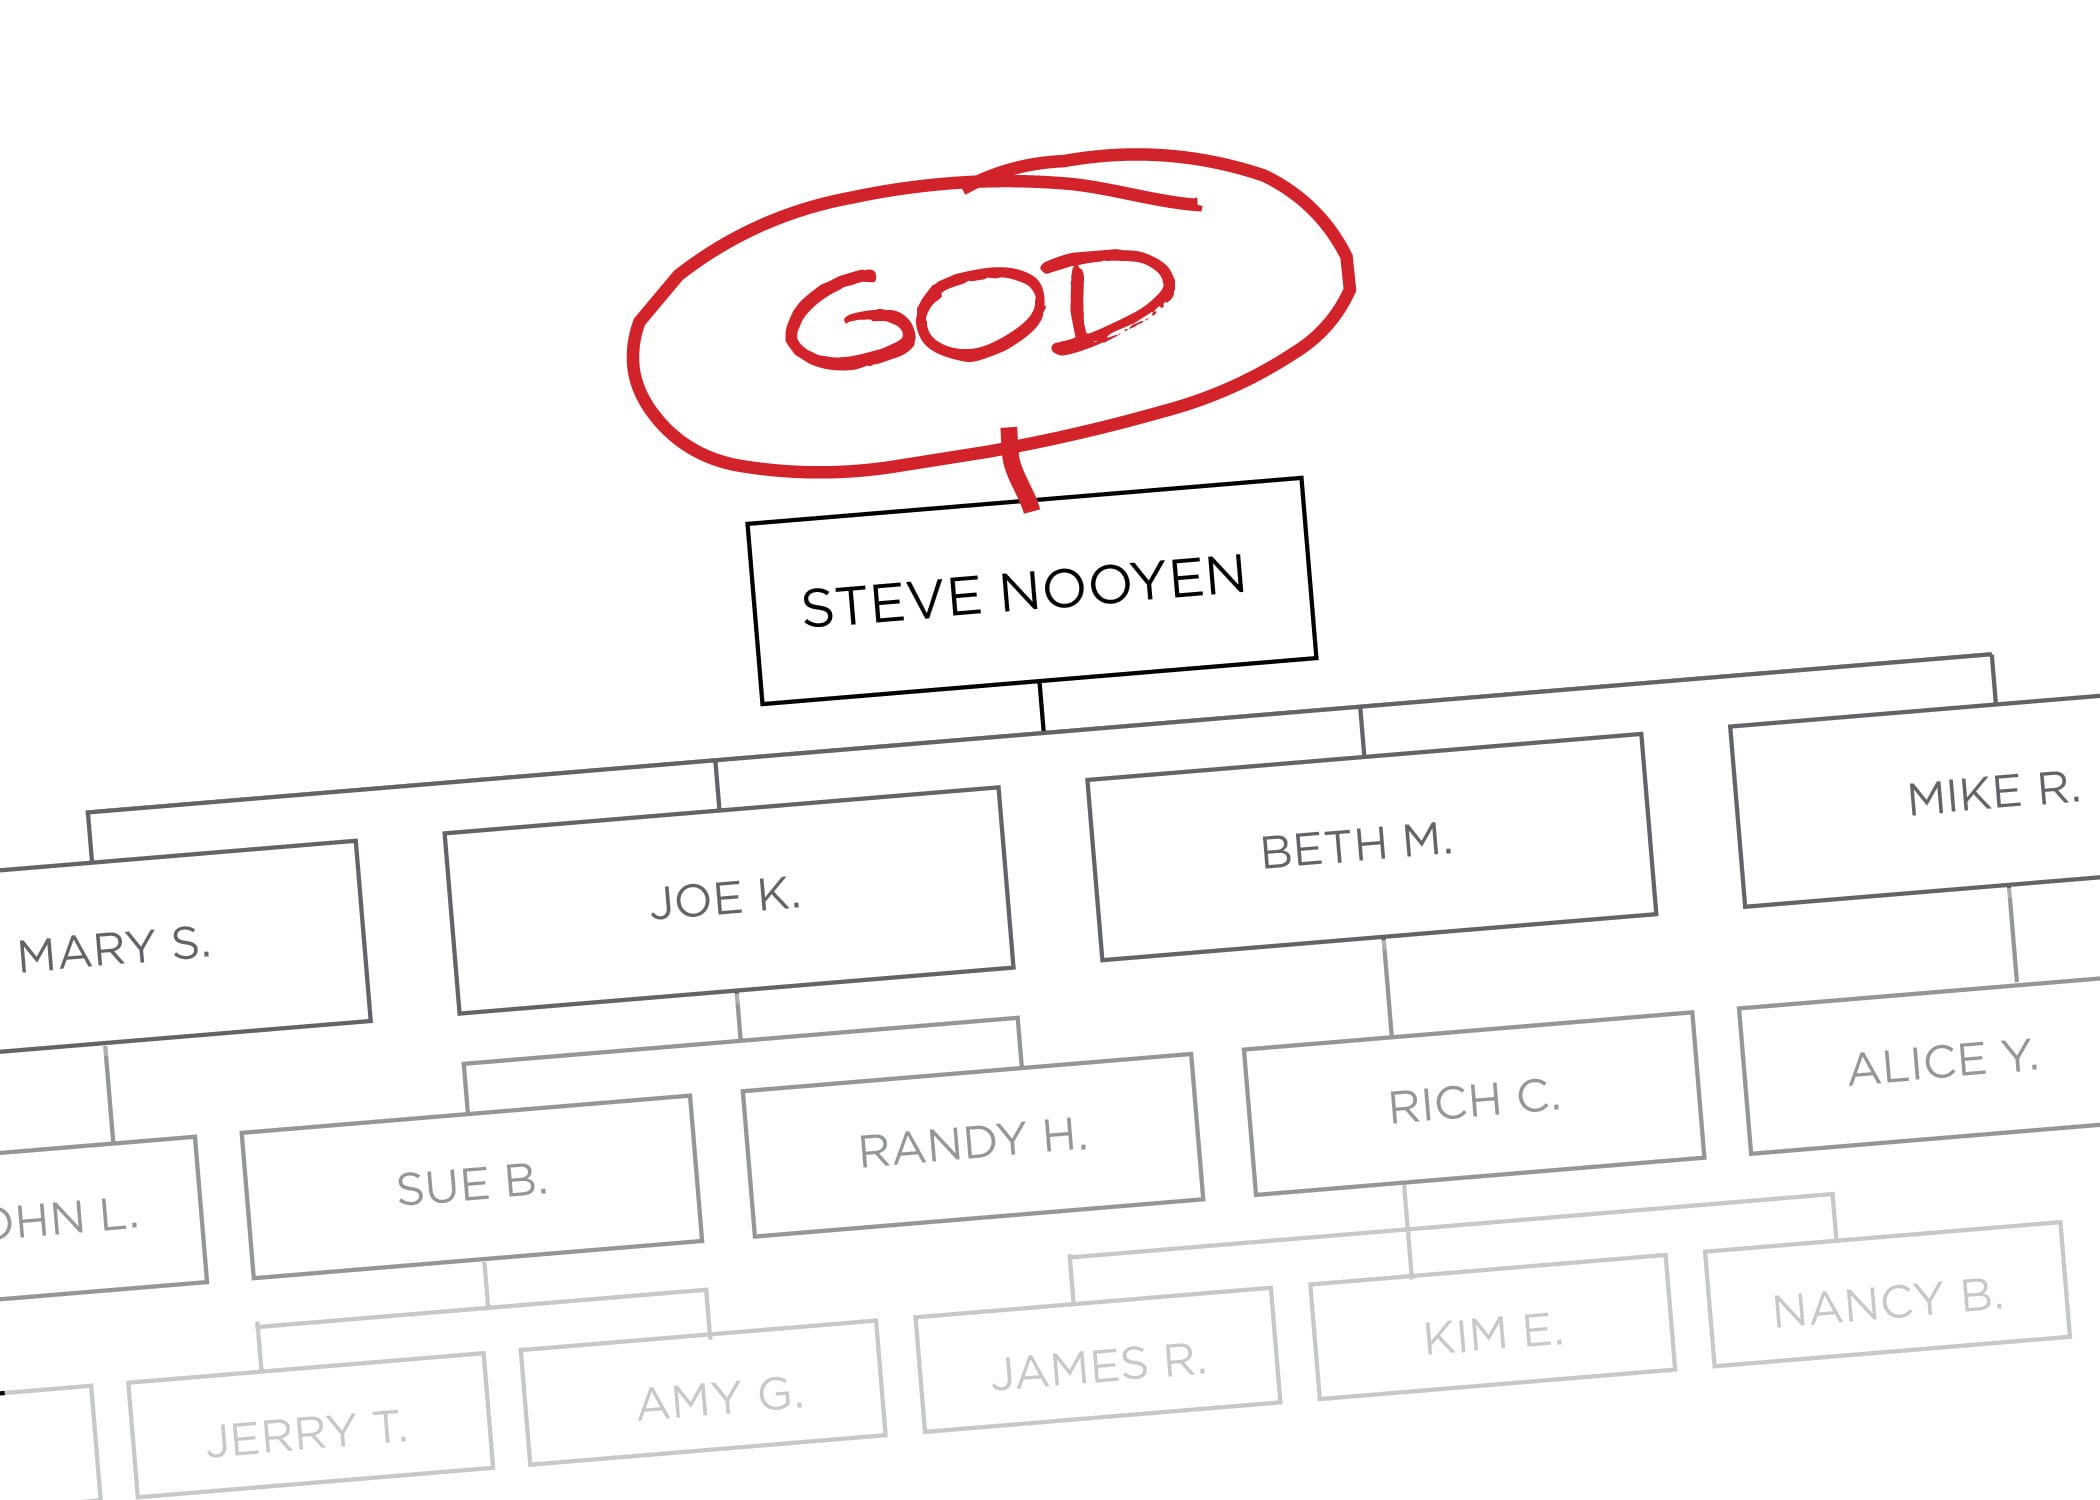 HT Alum Steve Nooyen Made God the CEO of His Company – Then the Real Adventure Began